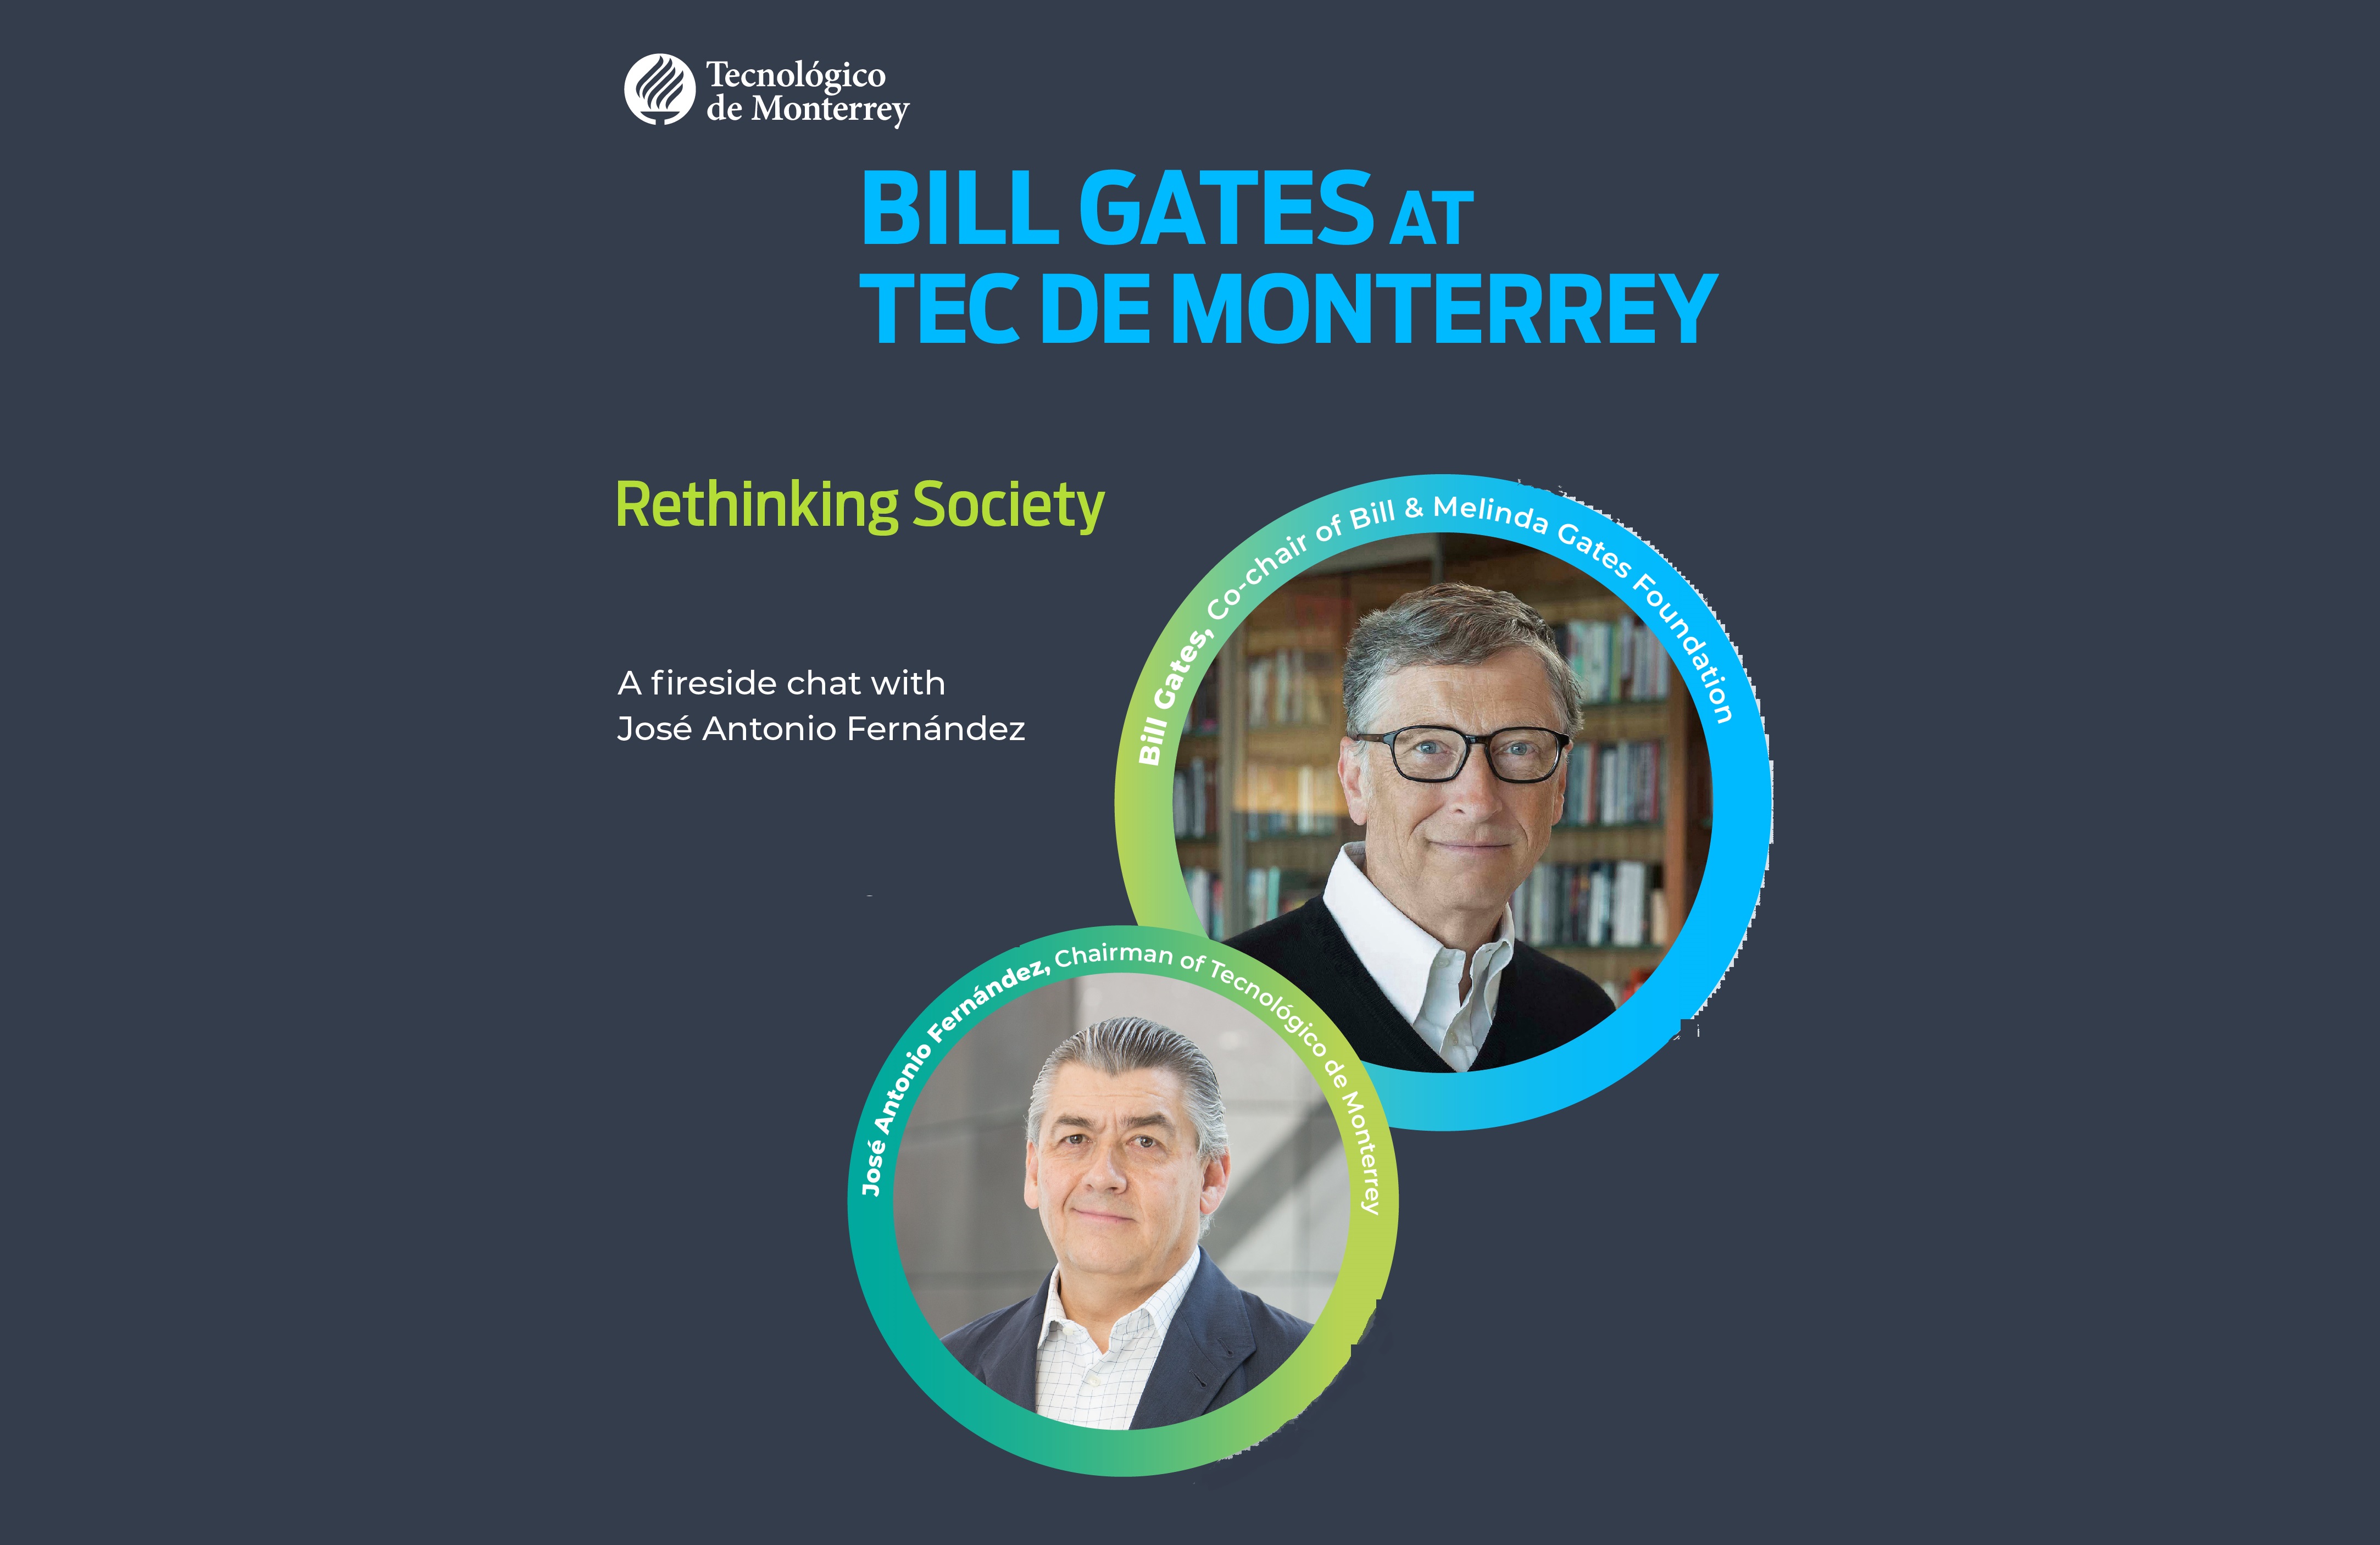 Rethinking Society  | A fireside chat with Jose Antonio Fernandez and Bill Gates